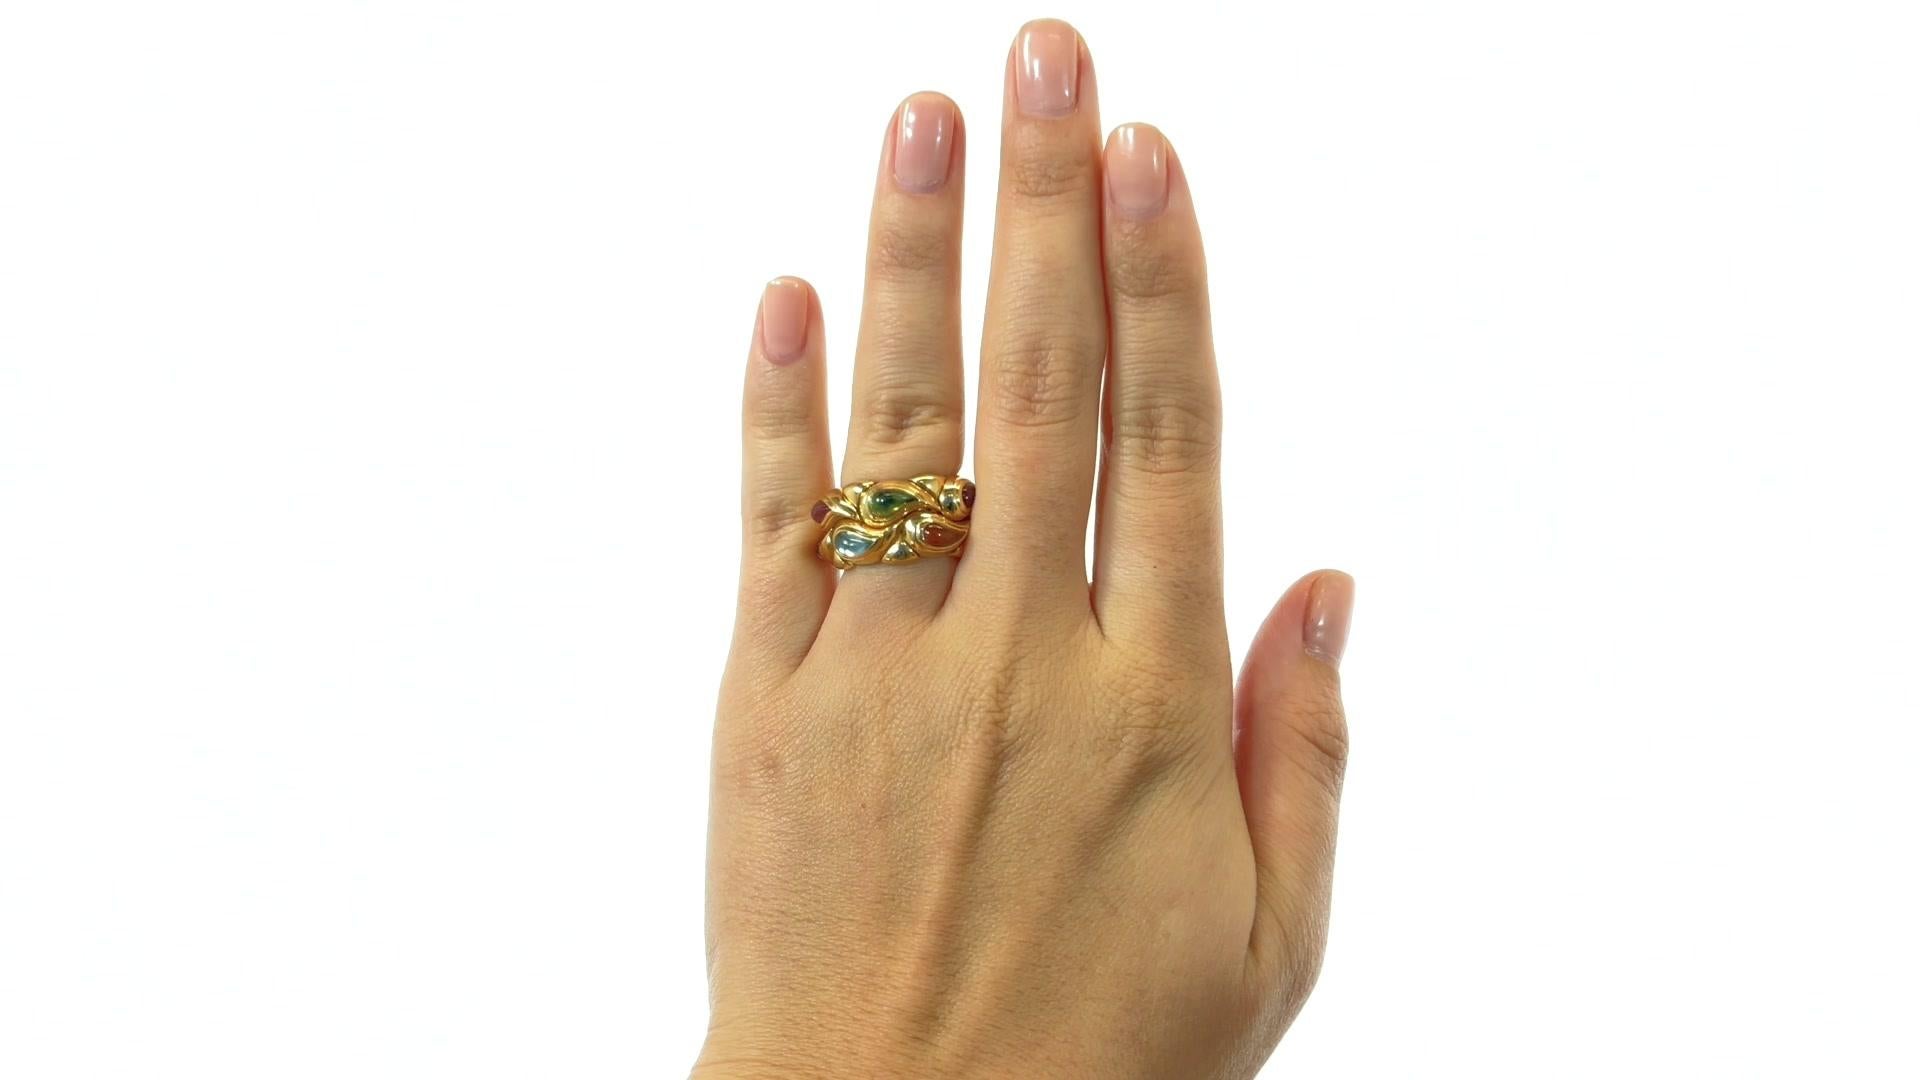 Vintage Chopard Casimir Collection Gemstone 18 Karat Gold Ring. Featuring cabochon pear-shape citrine, amethyst, tourmaline, quartz, topaz, and peridot. Signed Chopard serial #9164466. Circa 2000s.

About The Piece: Desired and coveted, this Vintage